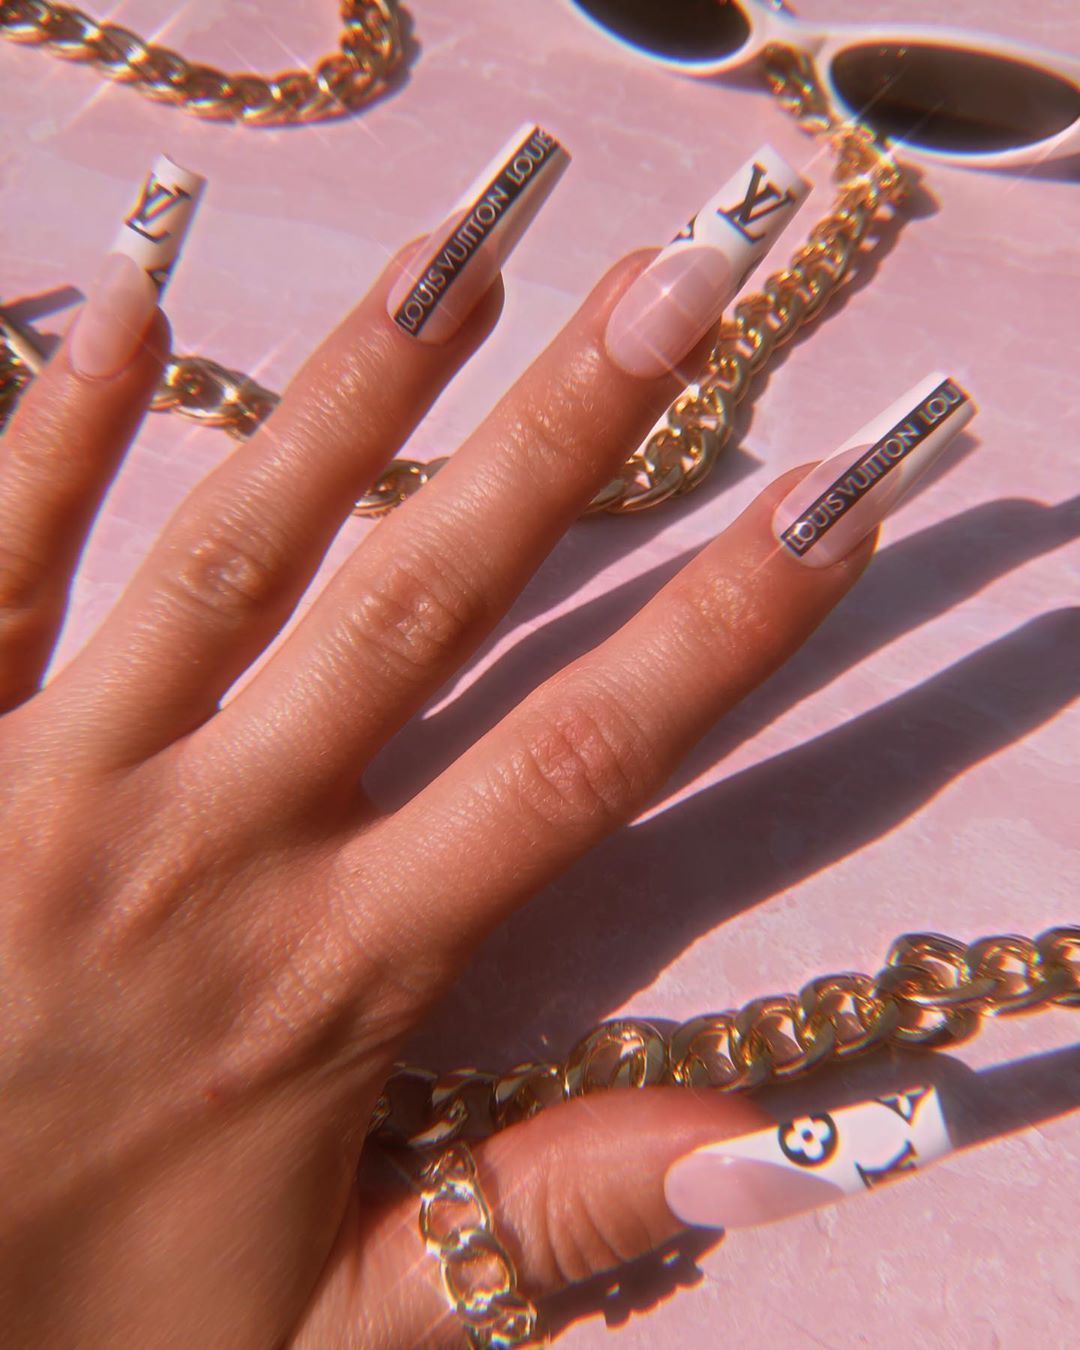 27 Louis Vuitton Nails for an Iconic HighEnd Look